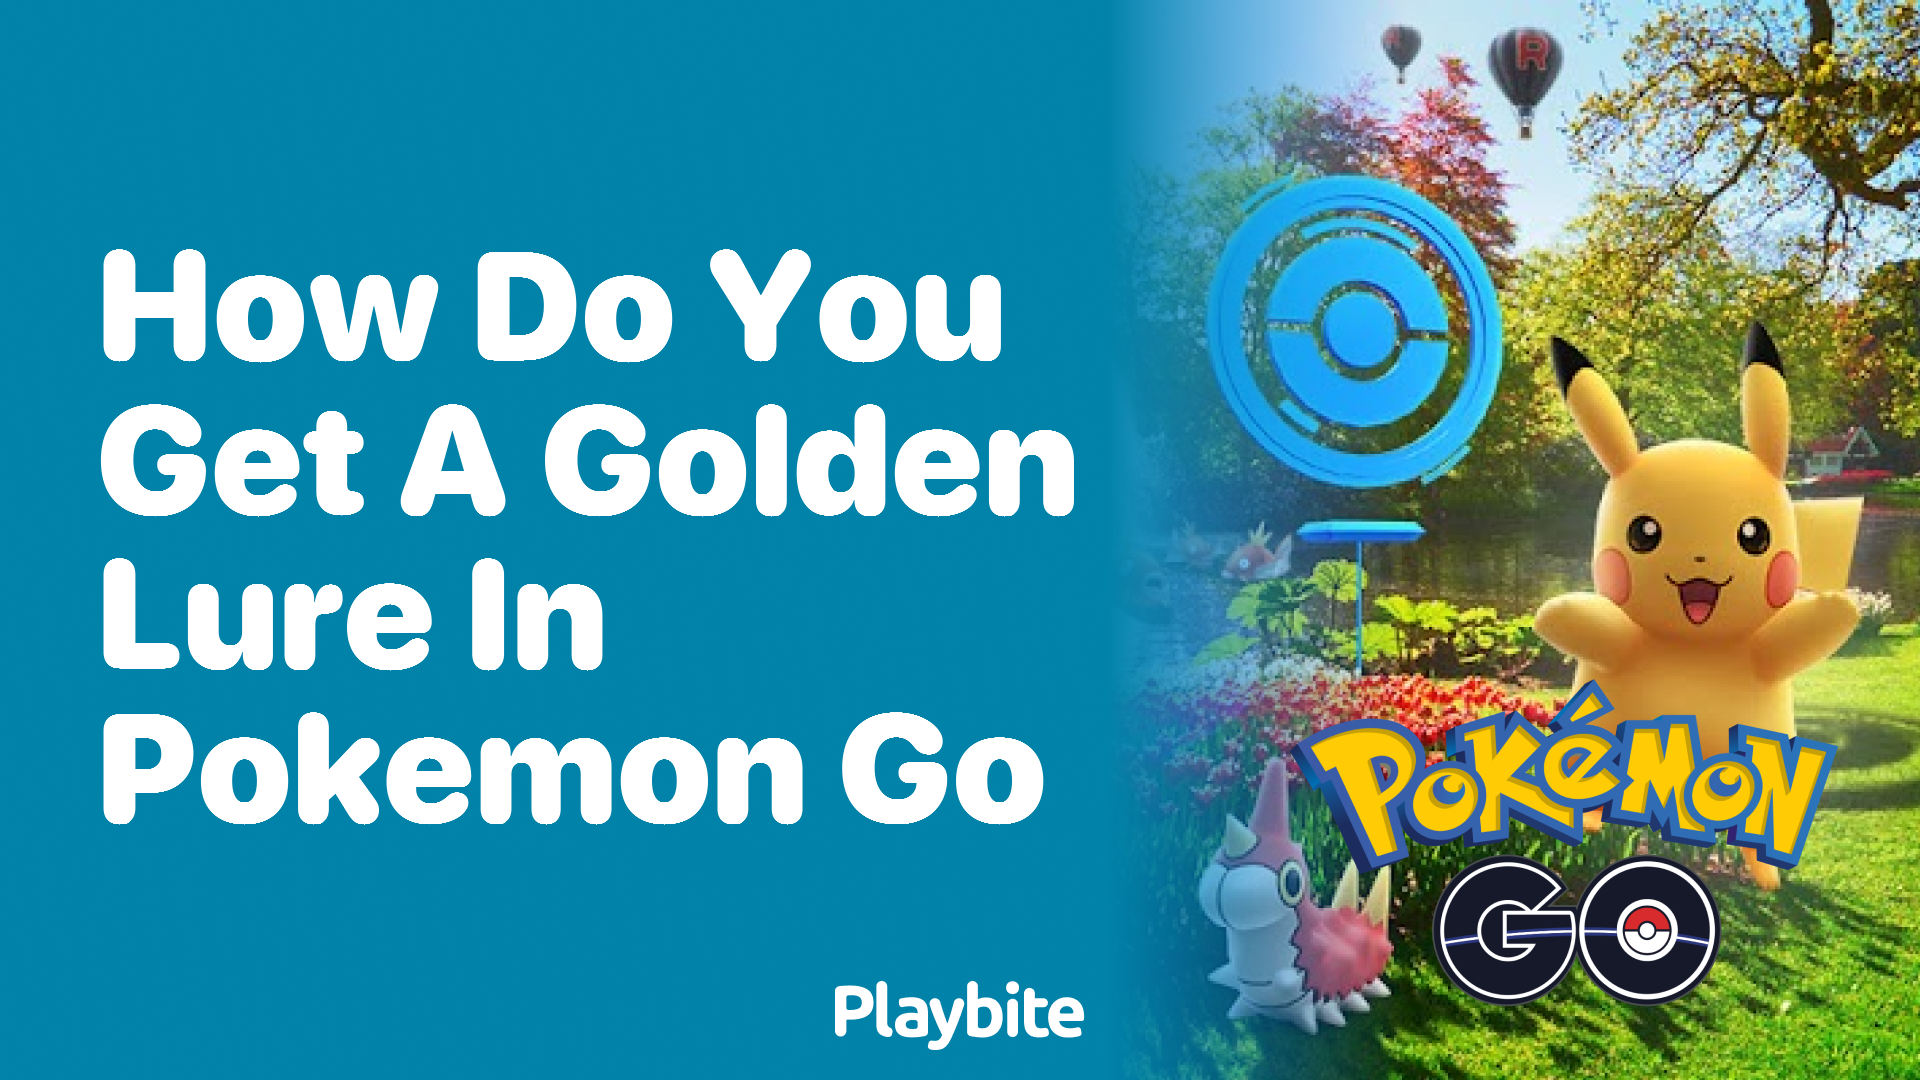 How Do You Get a Golden Lure in Pokemon GO? - Playbite